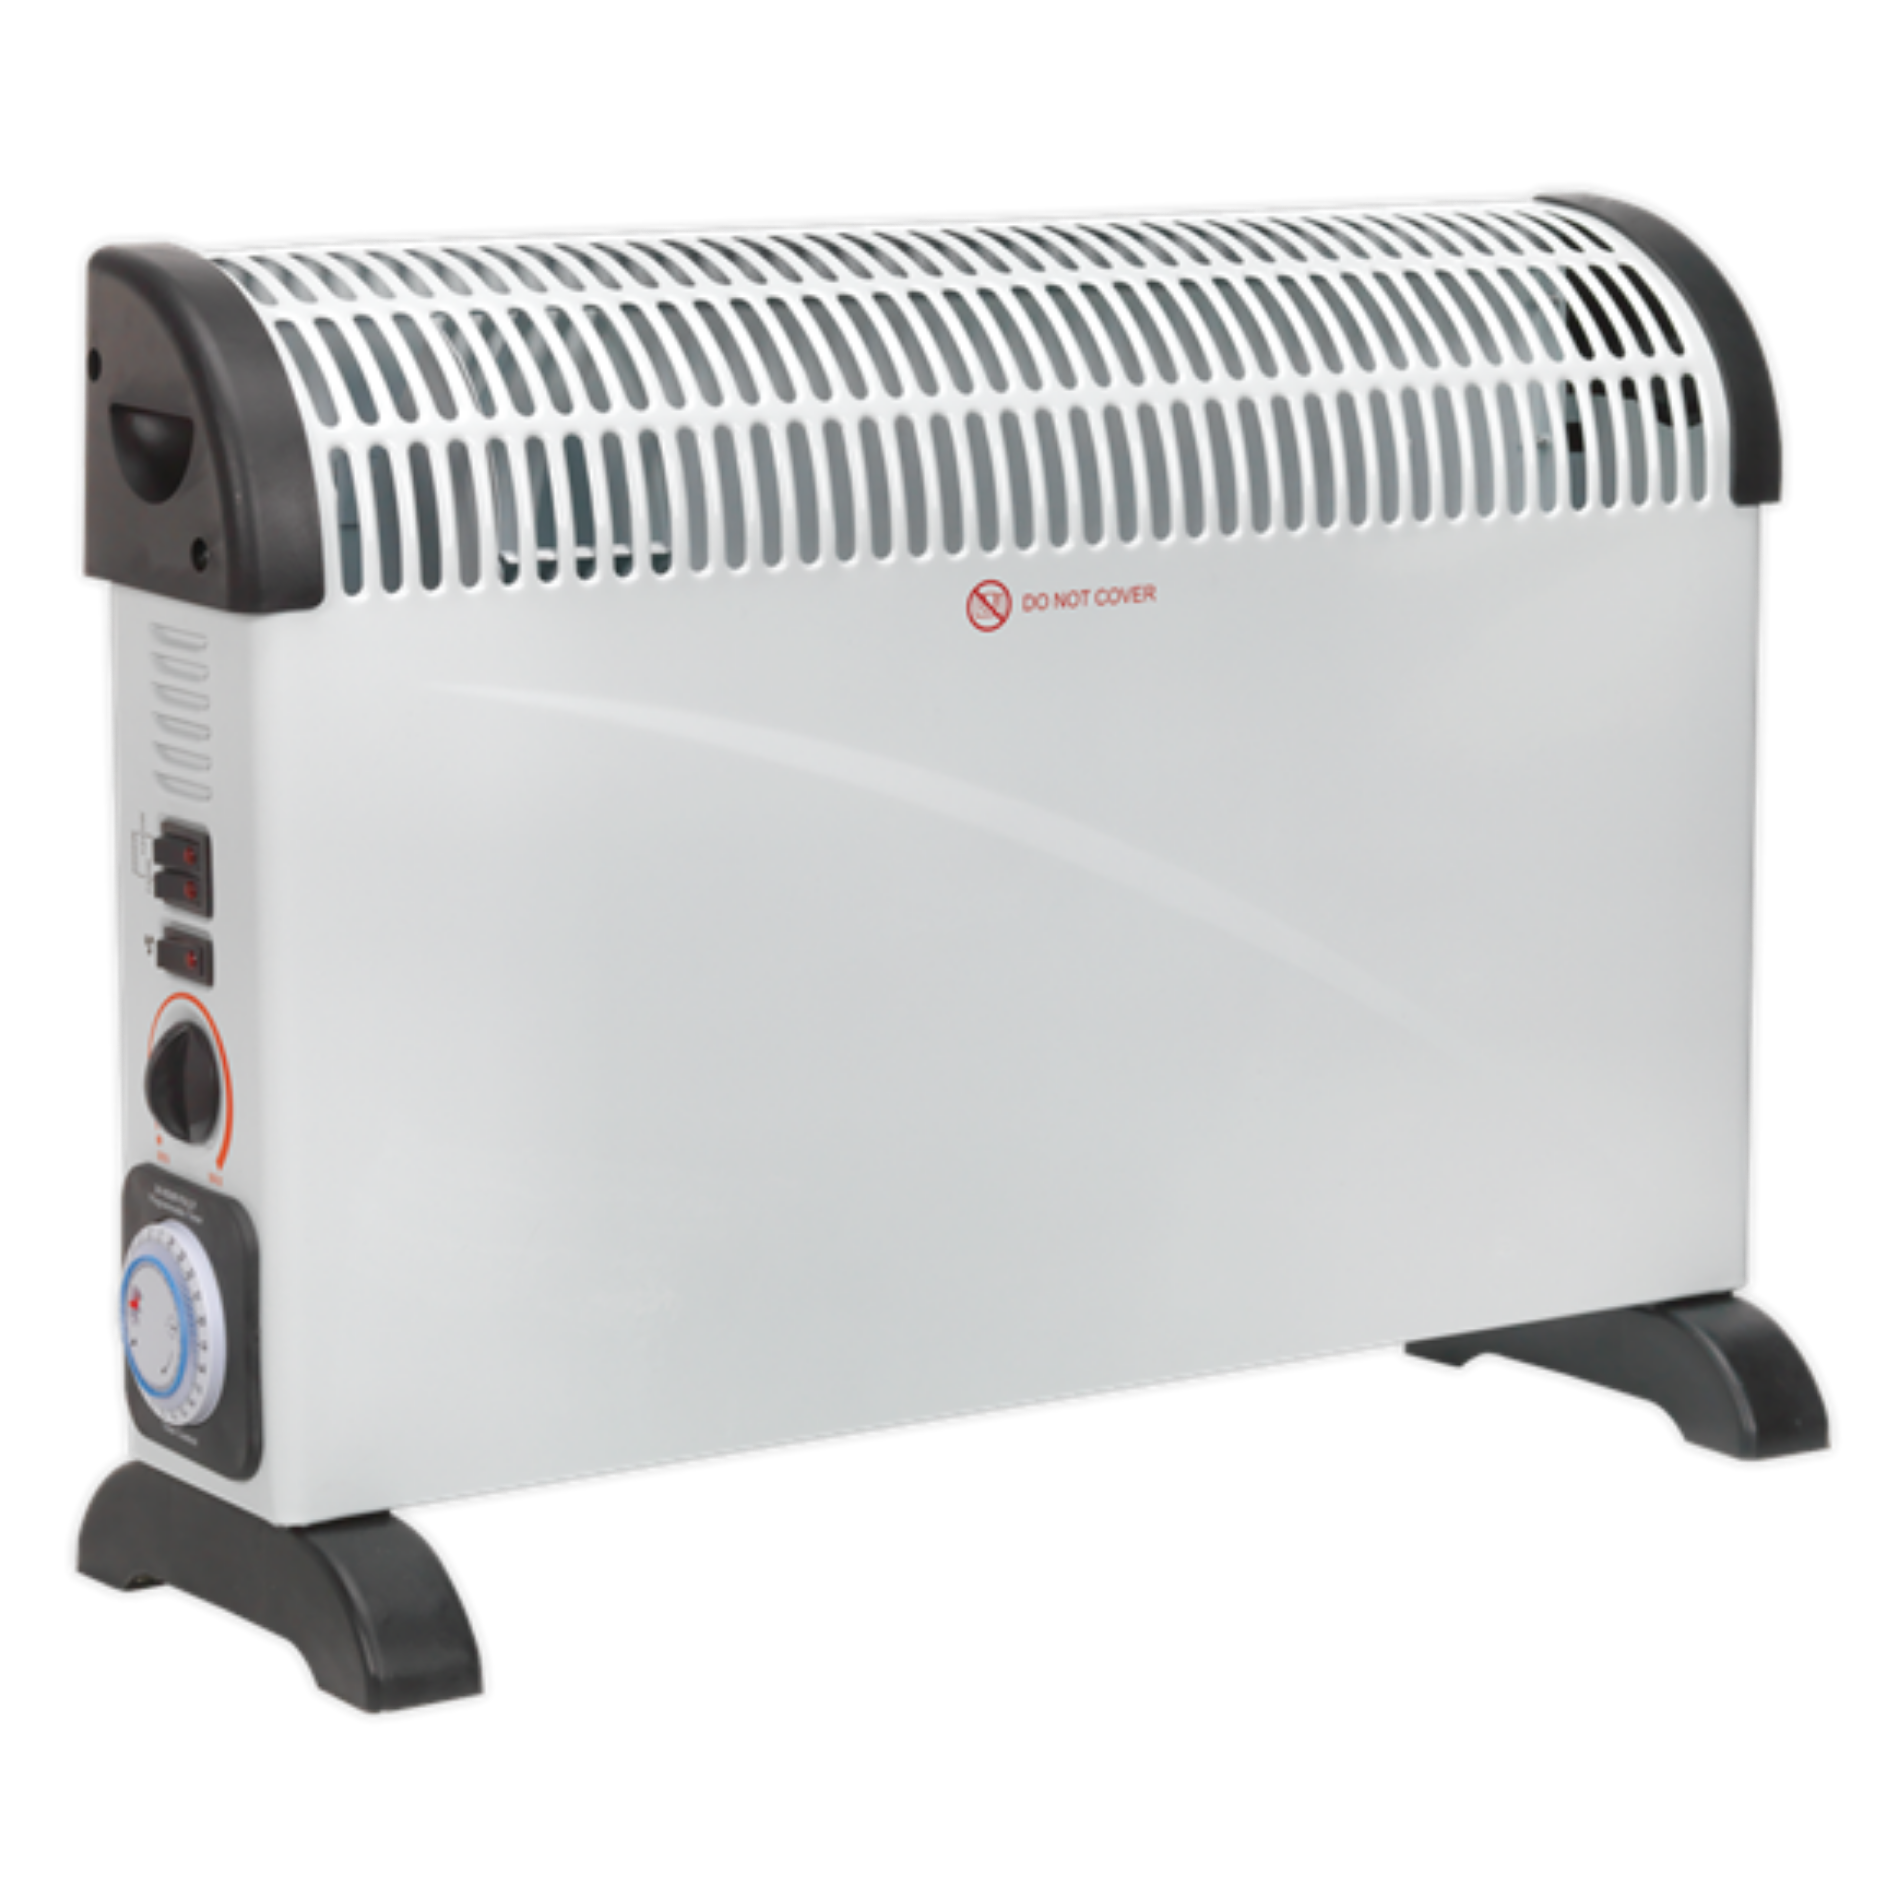 Picture of Sealey CD2005TT 2kW Convector Heater with Turbo, Timer & Thermostat